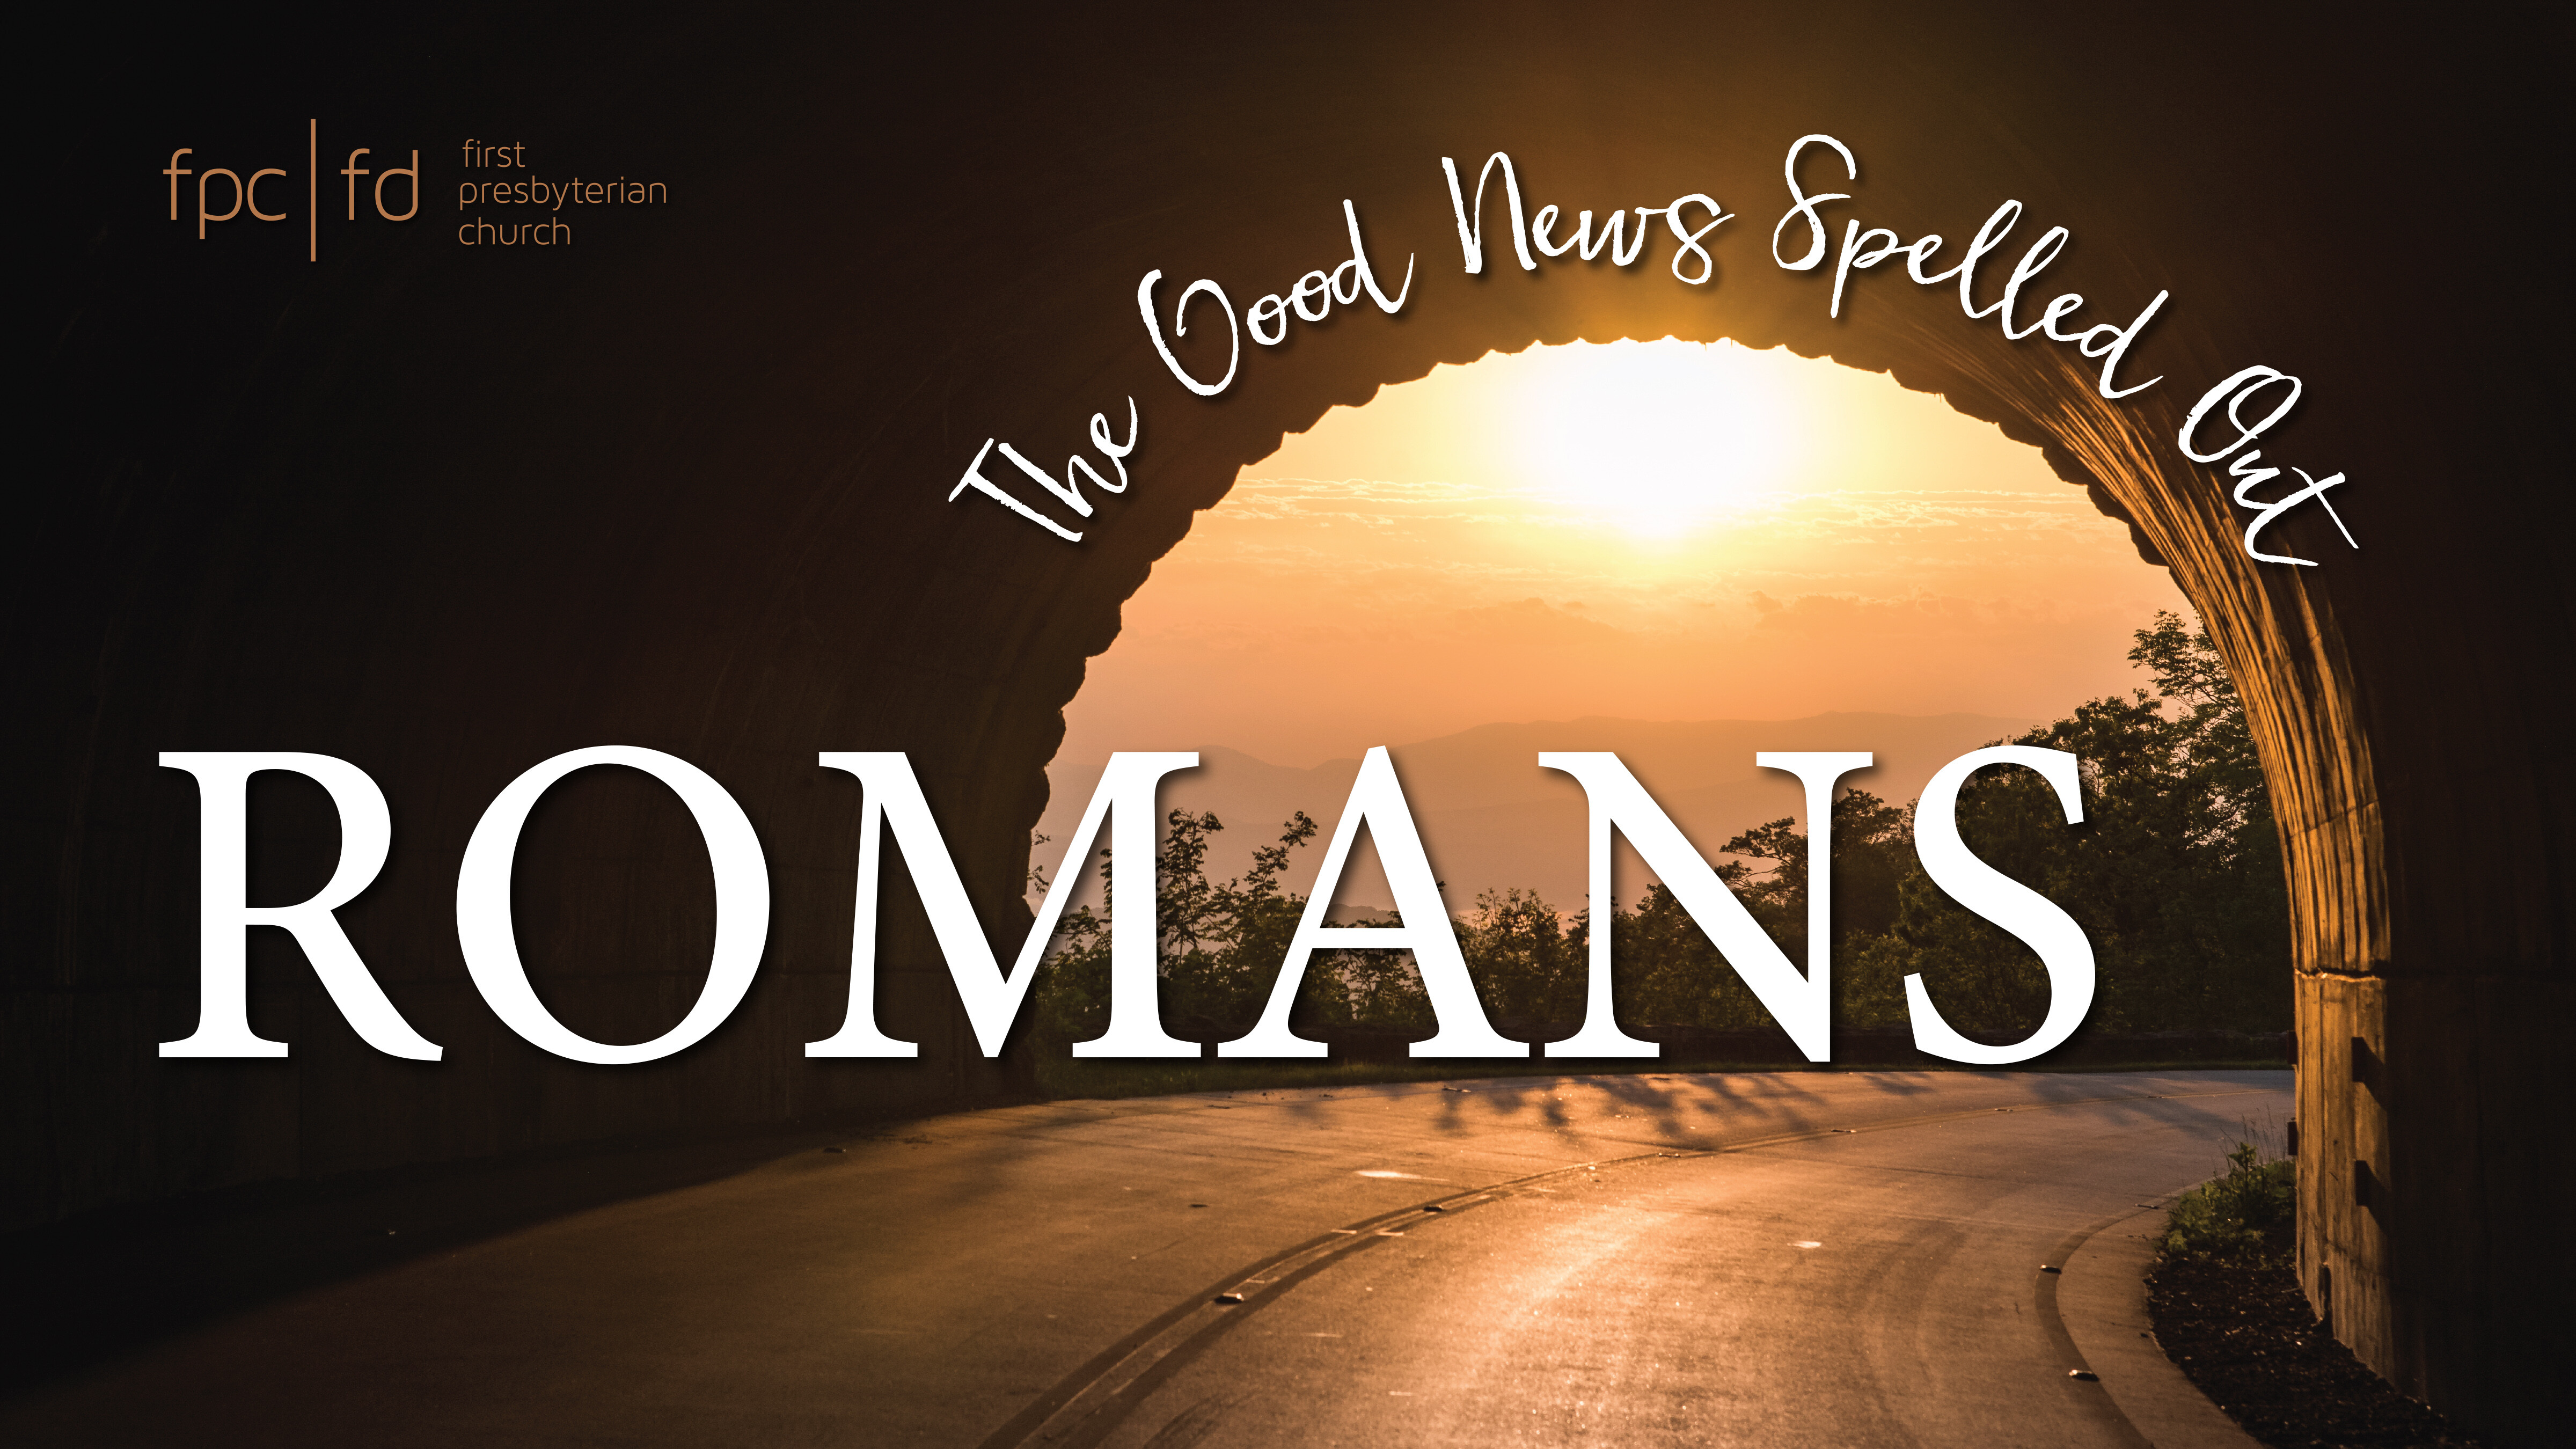 "Romans: The Good News Spelled Out"